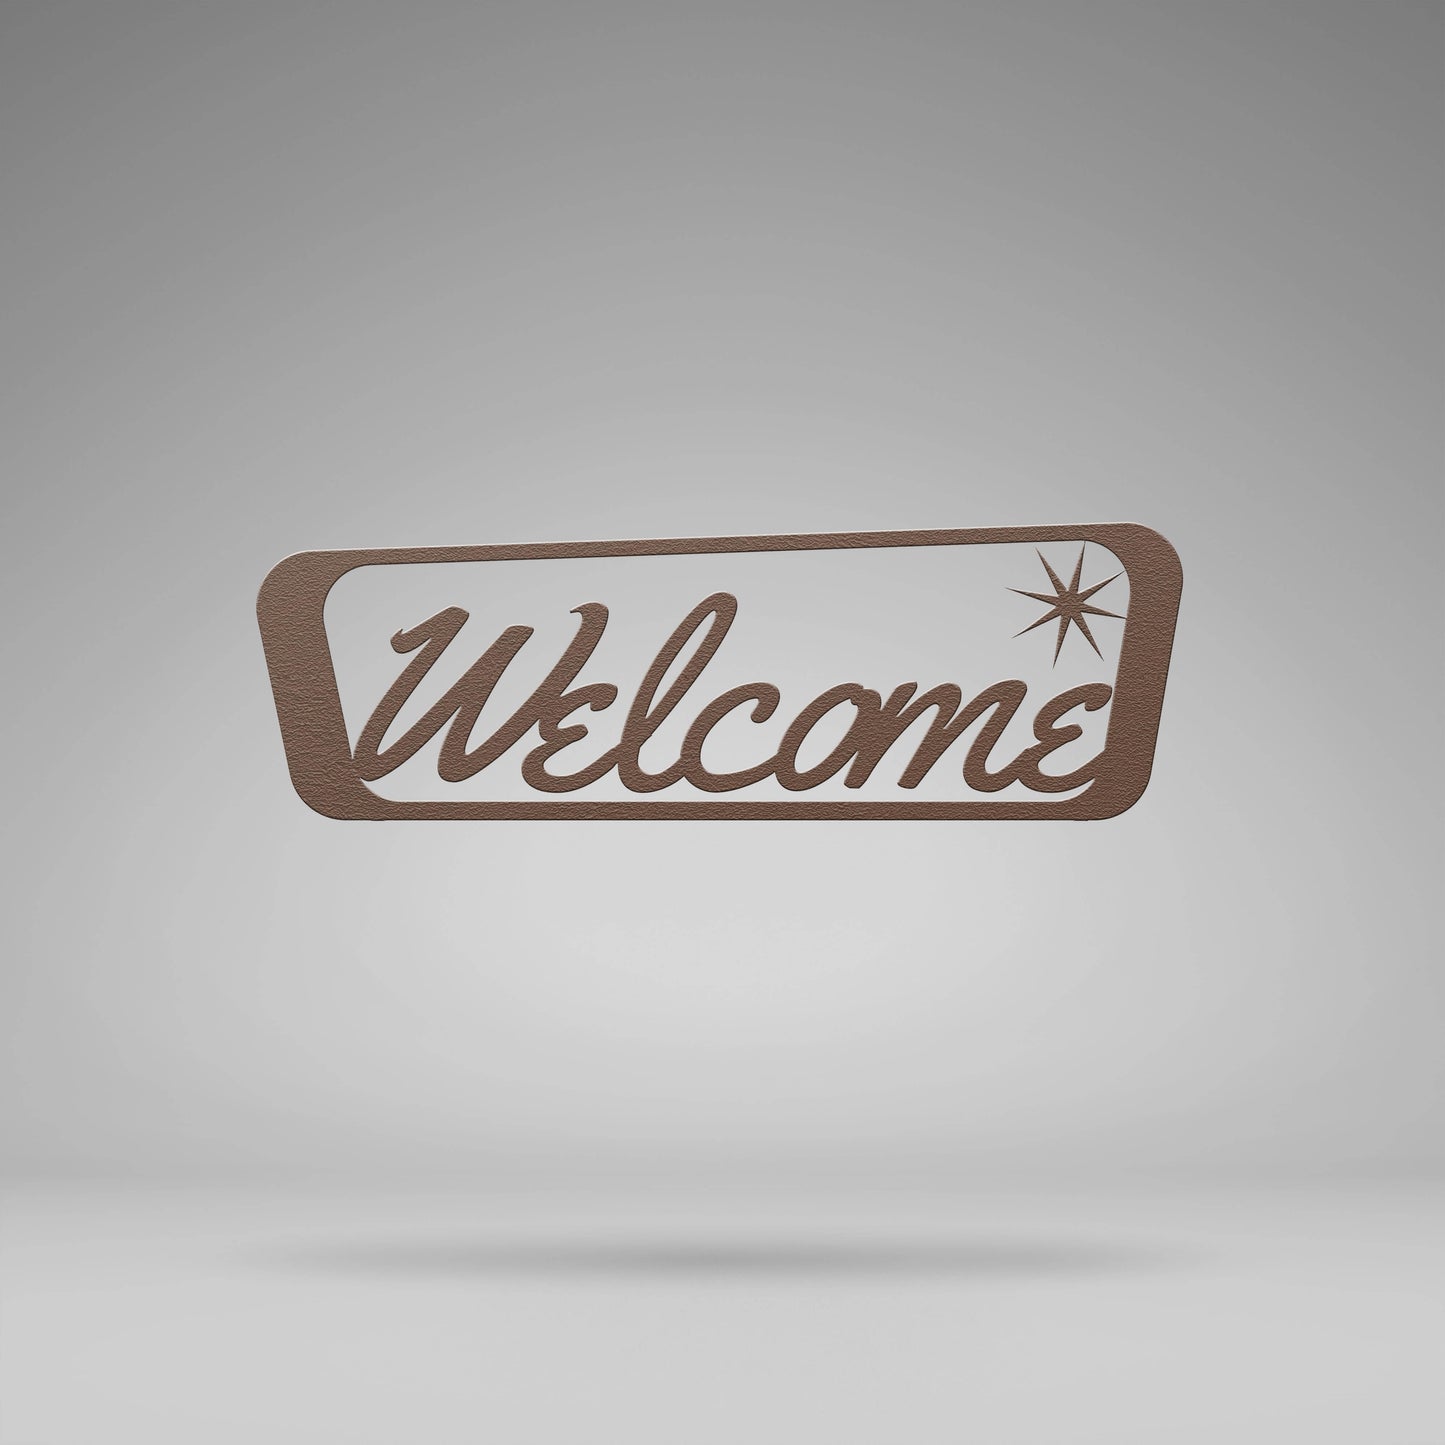 Mid-Century Modern Retro Welcome Sign - Add Retro Charm to Your Home